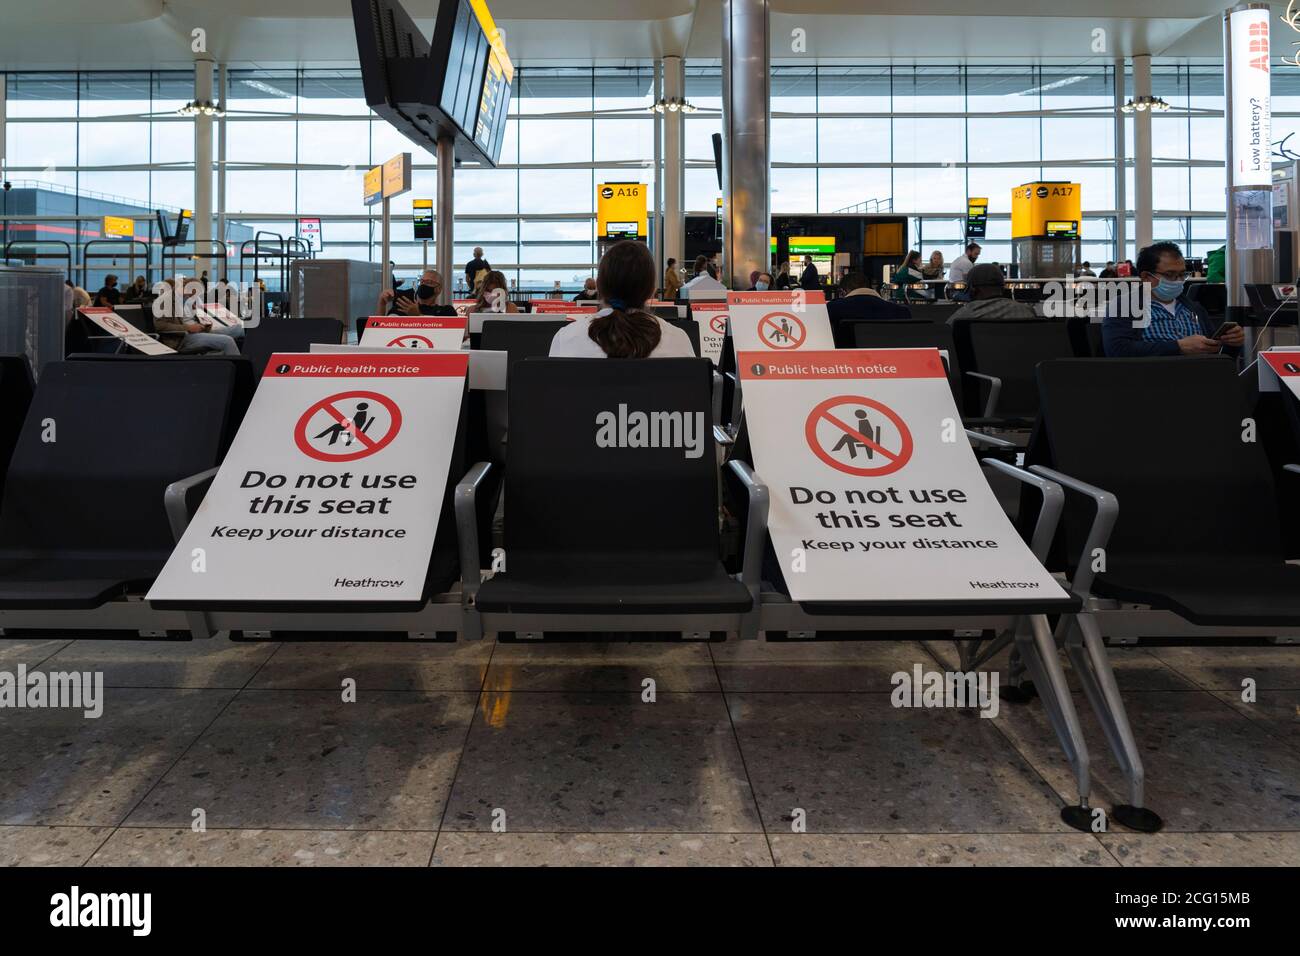 Seating blocked off with signs to maintain social distancing for public health, Terminal 3 in Heathrow Airport, for the Covid-19 Coronavirus pandemic Stock Photo